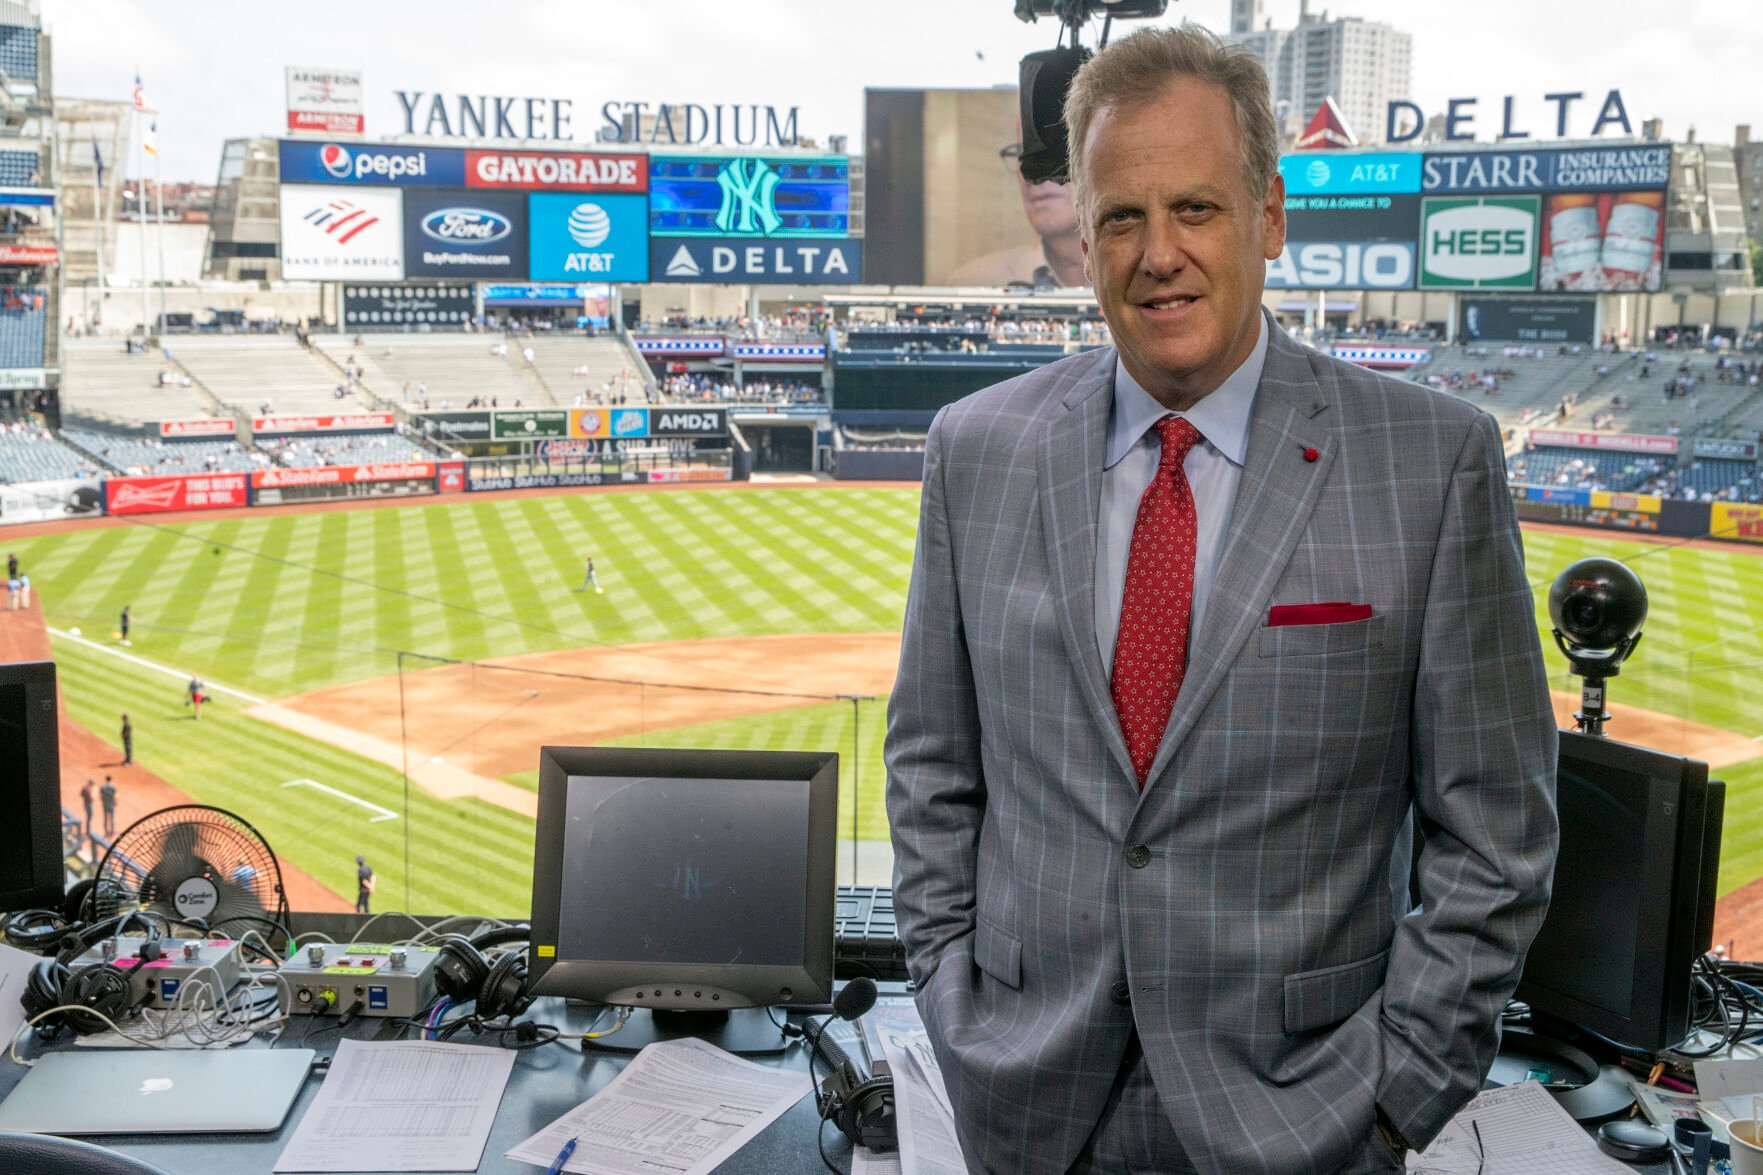 MLB broadcasters adapting to faster pace under new rules